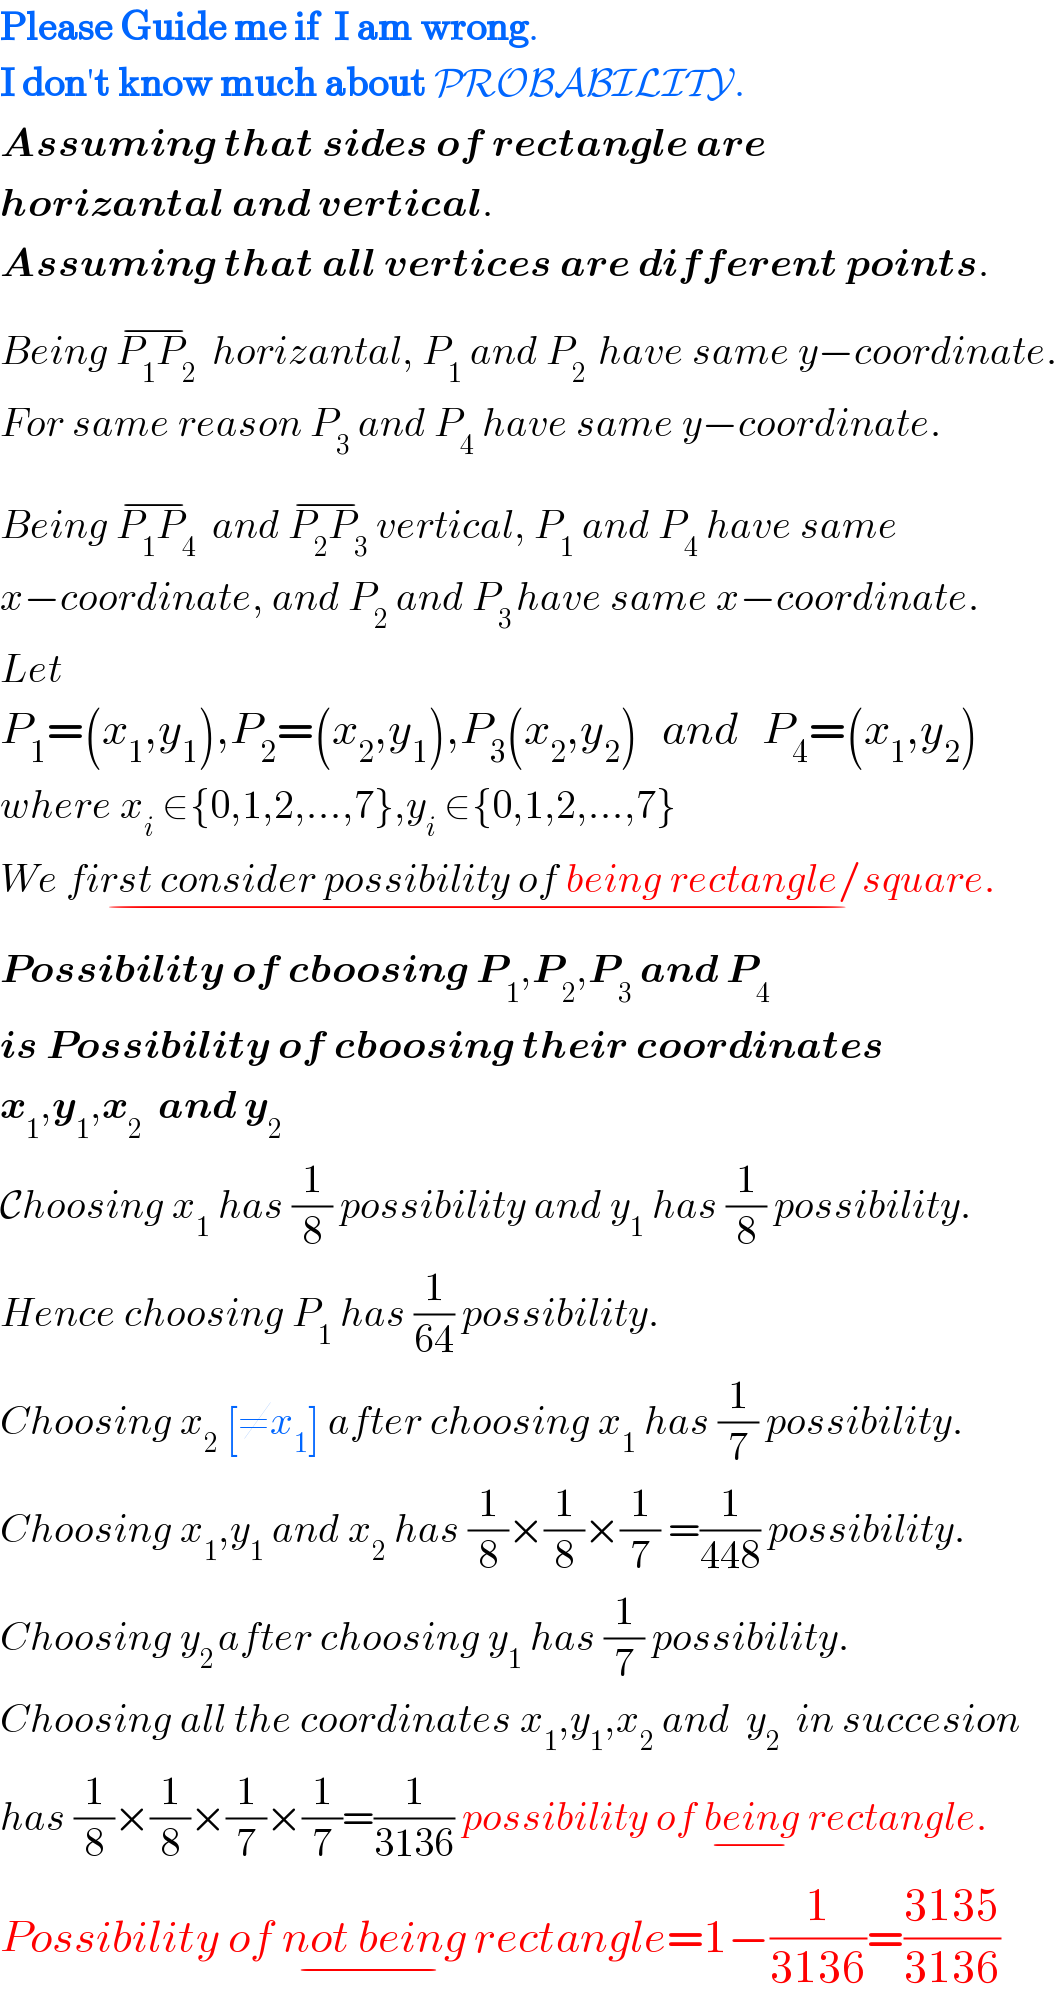 Please Guide me if  I am wrong.  I don′t know much about PROBABILITY.  Assuming that sides of rectangle are  horizantal and vertical.  Assuming that all vertices are different points.  Being P_1 P_2 ^(−)   horizantal, P_1  and P_(2 )  have same y−coordinate.  For same reason P_3  and P_4  have same y−coordinate.  Being P_1 P_4 ^(−)   and P_2 P_3 ^(−)  vertical, P_1  and P_4  have same  x−coordinate, and P_2  and P_(3 ) have same x−coordinate.  Let  P_1 =(x_1 ,y_1 ),P_2 =(x_2 ,y_1 ),P_3 (x_2 ,y_2 )   and   P_4 =(x_1 ,y_2 )  where x_i  ∈{0,1,2,...,7},y_i  ∈{0,1,2,...,7}  We first consider possibility of being rectangle/square._(−)   Possibility of cboosing P_1 ,P_2 ,P_3  and P_4    is Possibility of cboosing their coordinates  x_1 ,y_1 ,x_2   and y_2   Choosing x_1  has (1/8) possibility and y_1  has (1/8) possibility.  Hence choosing P_1  has (1/(64)) possibility.  Choosing x_2  [≠x_1 ] after choosing x_1  has (1/7) possibility.  Choosing x_1 ,y_1  and x_2  has (1/8)×(1/8)×(1/7) =(1/(448)) possibility.  Choosing y_(2 ) after choosing y_1  has (1/7) possibility.   Choosing all the coordinates x_1 ,y_1 ,x_2  and  y_2   in succesion  has (1/8)×(1/8)×(1/7)×(1/7)=(1/(3136)) possibility of being_(−)  rectangle.  Possibility of not being_(−)  rectangle=1−(1/(3136))=((3135)/(3136))  